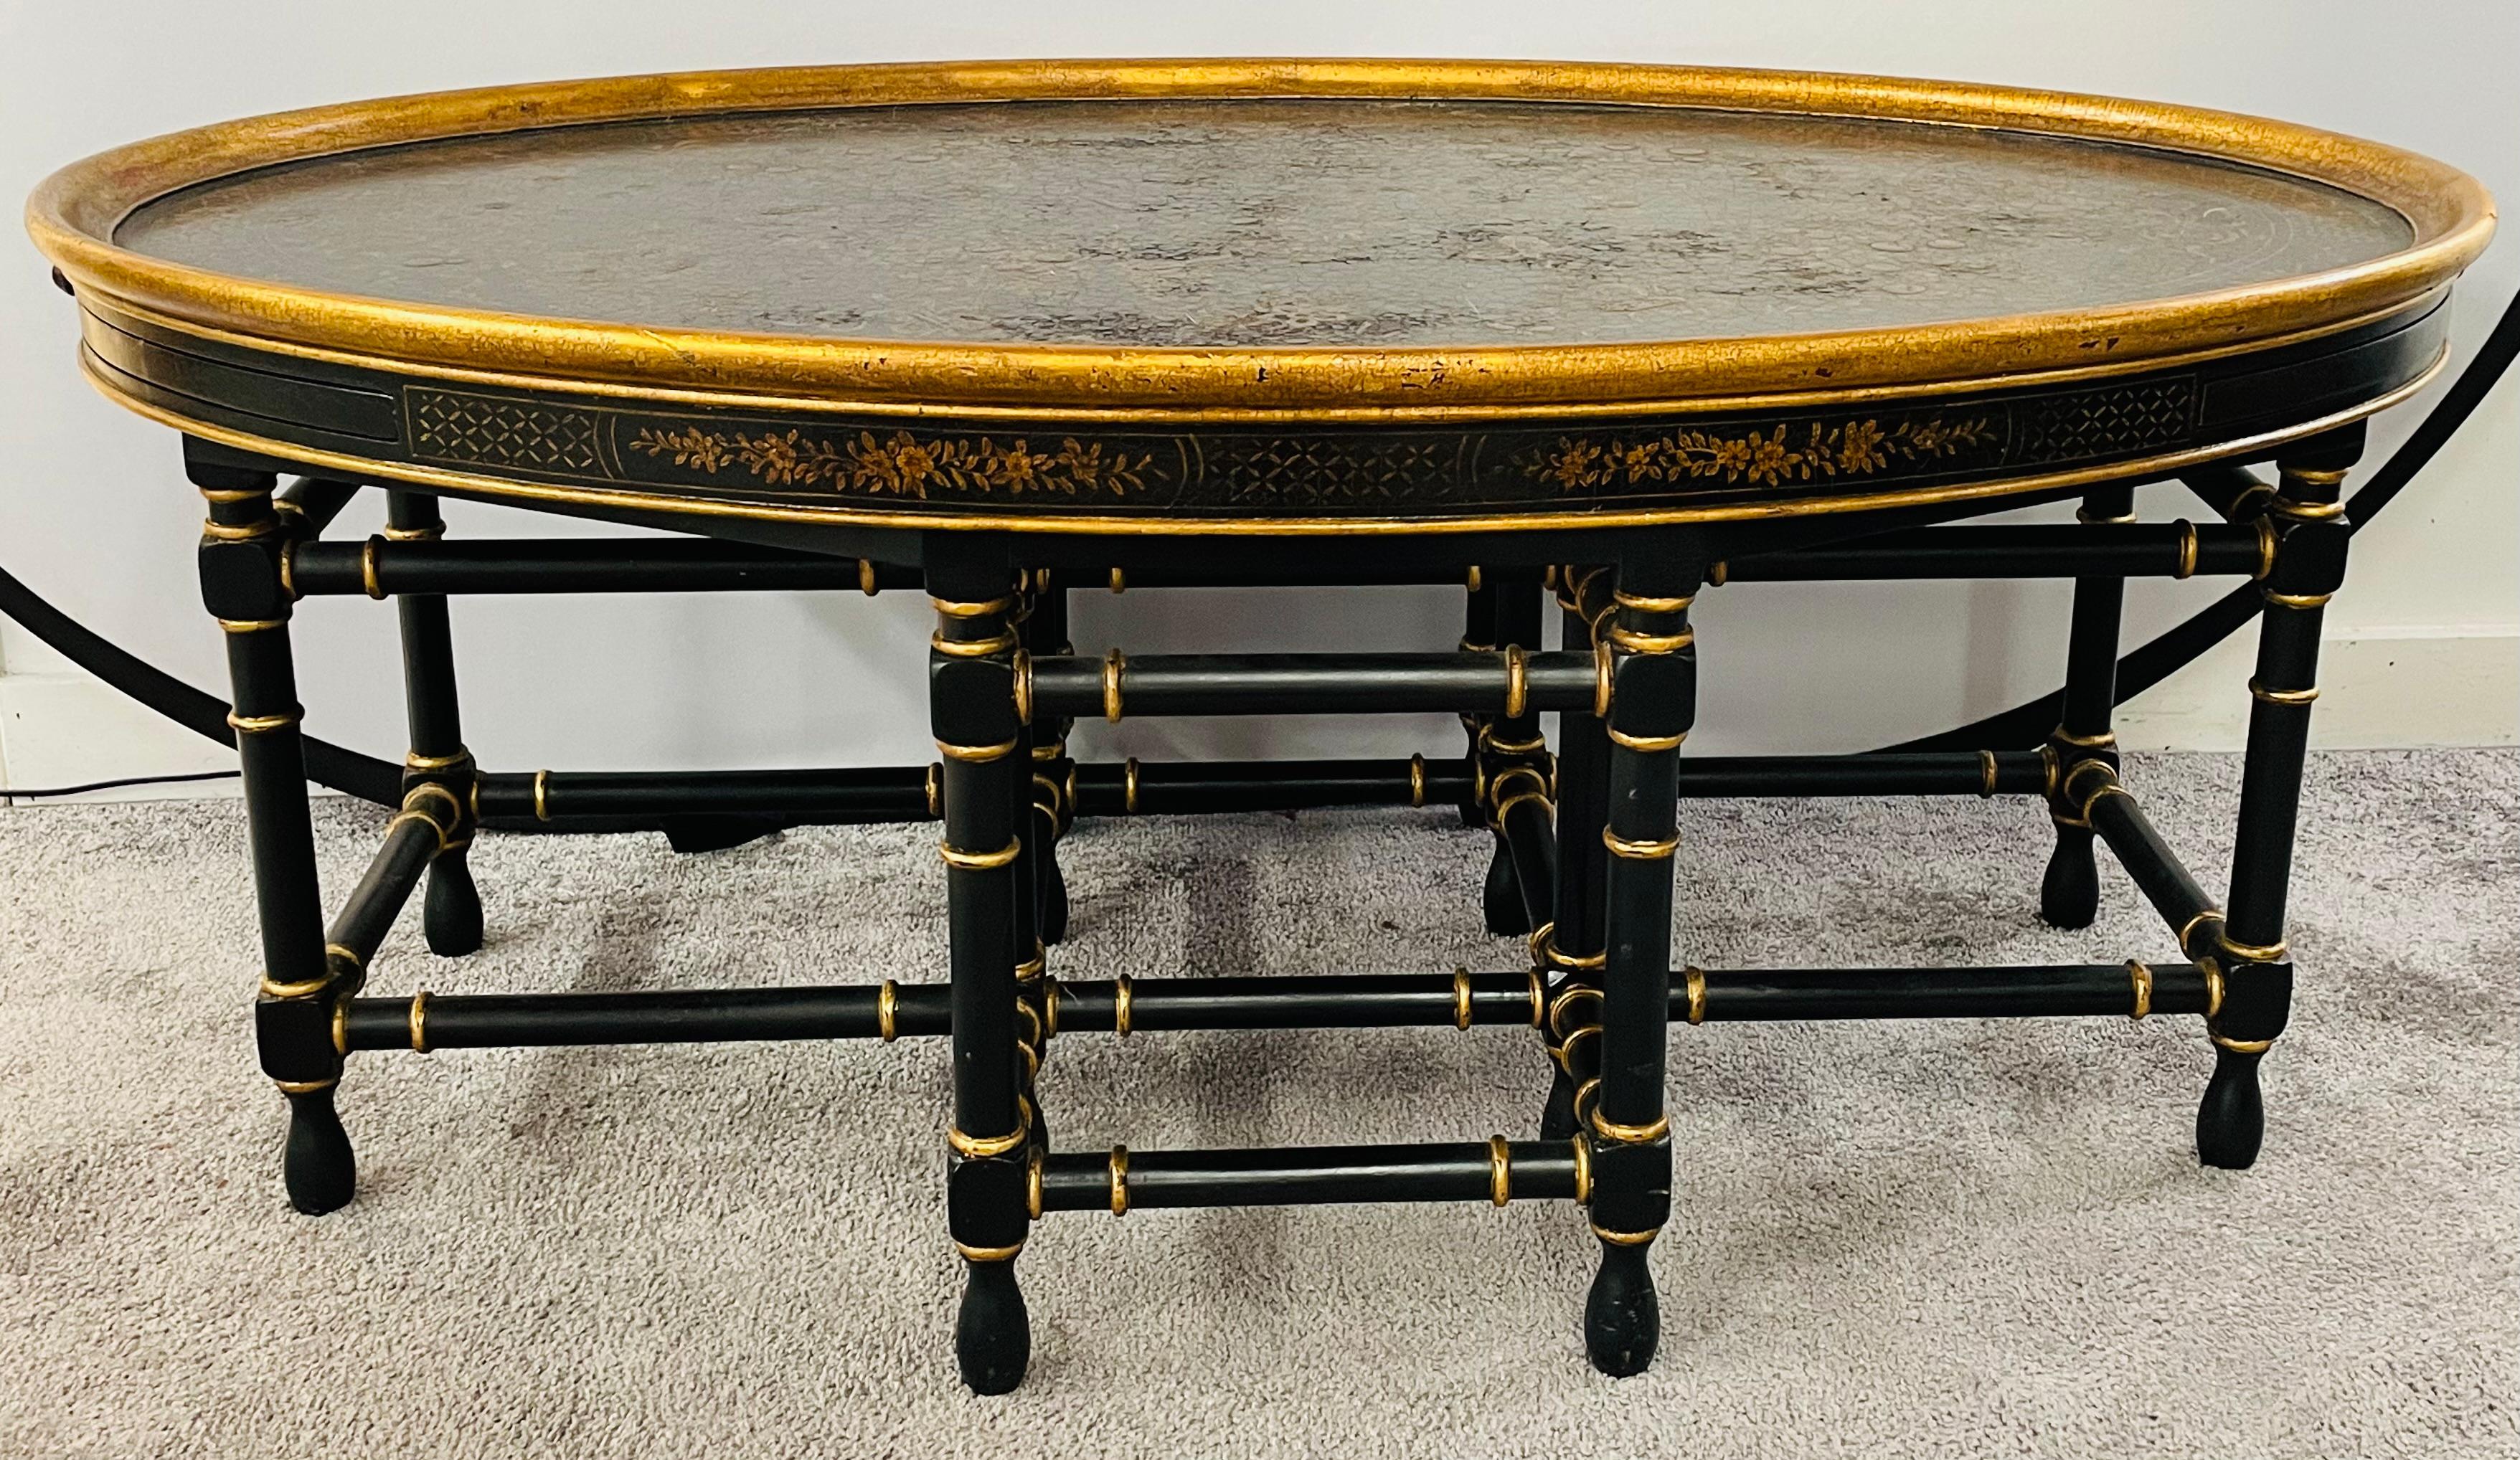 A versatile English Regency Chinoiserie style oval coffee table in black ebony and gold design. The table features intricate hand painted floral design and has two brown leather tooled pull out extensions from each side. The table is raised on faux